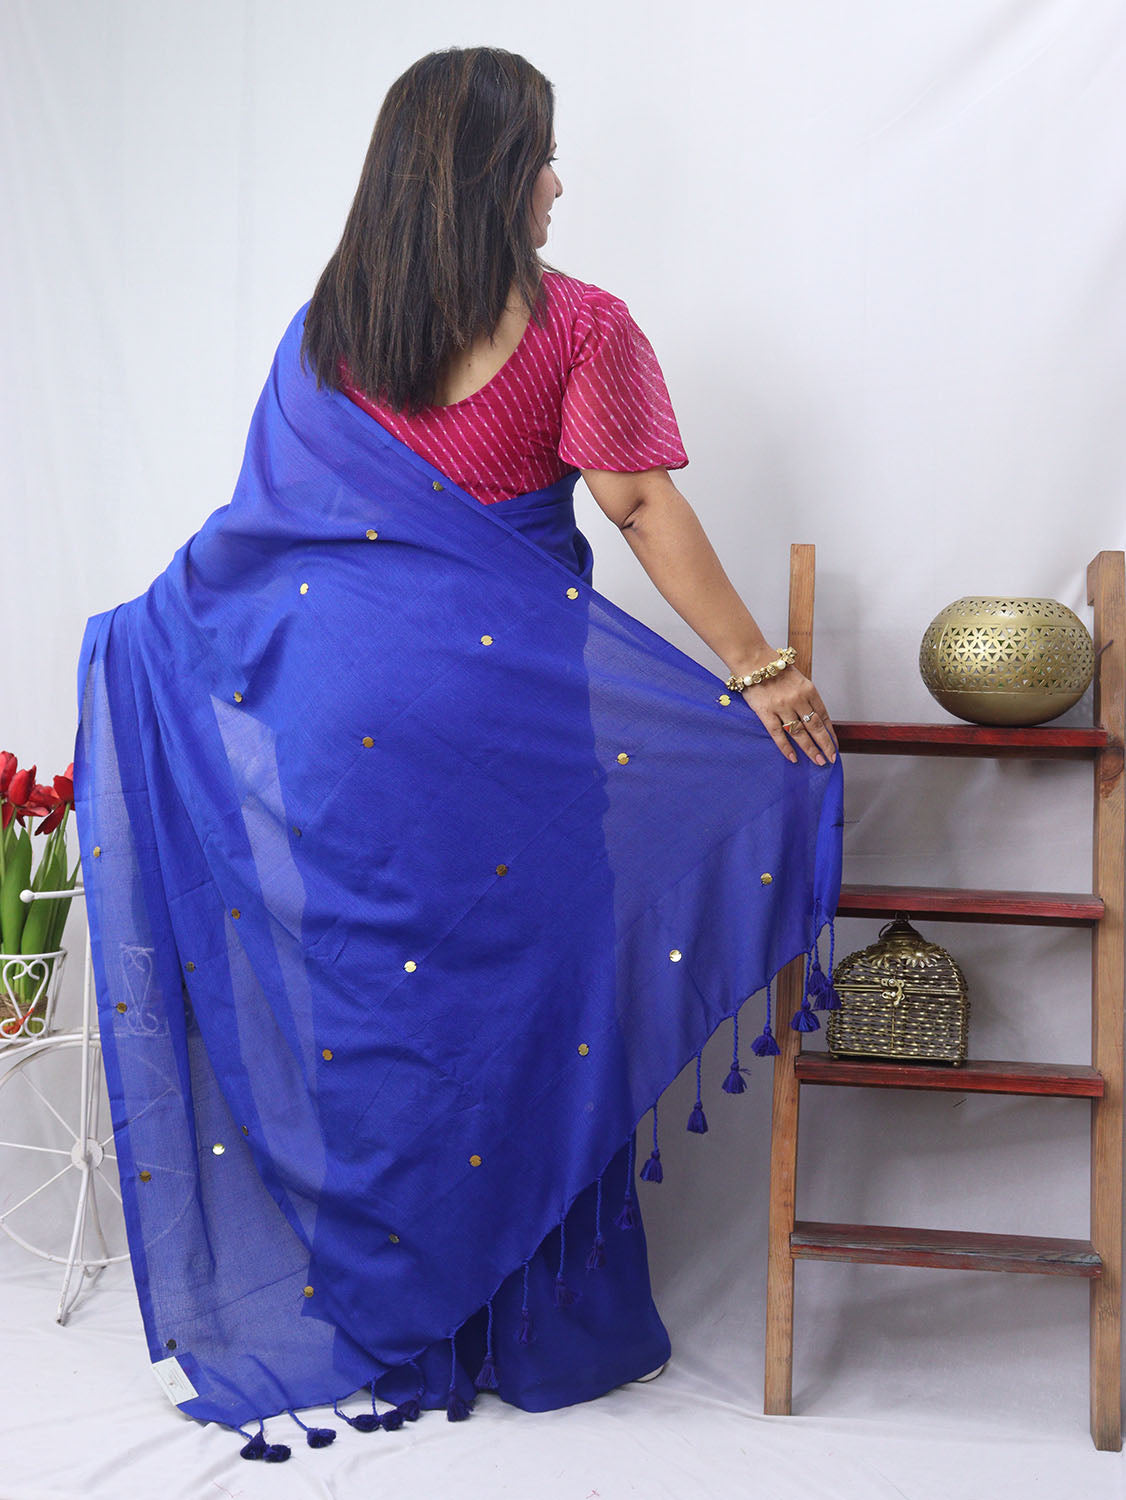 Stunning Blue Bengal Cotton Saree - Perfect for Any Occasion - Luxurion World